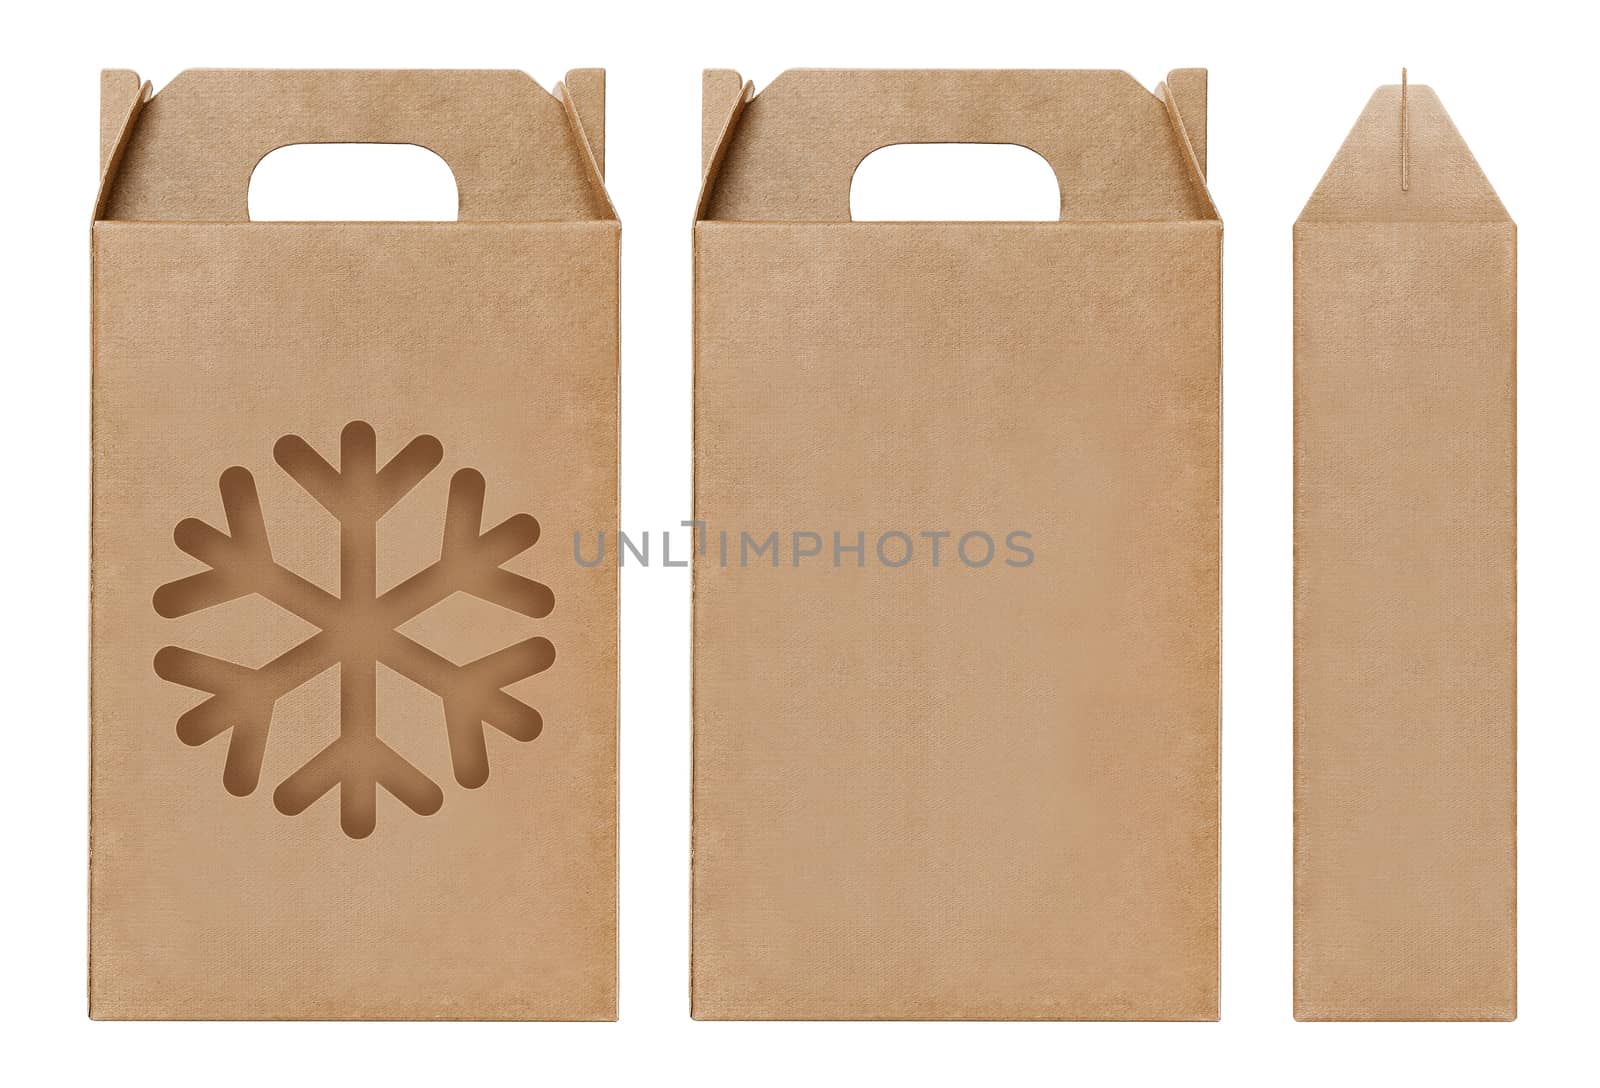 Box brown window Ice snow shape cut out Packaging template, Empty kraft Box Cardboard isolated white background, Boxes Paper kraft natural material, Gift Box Brown Paper from Industrial Packaging carton